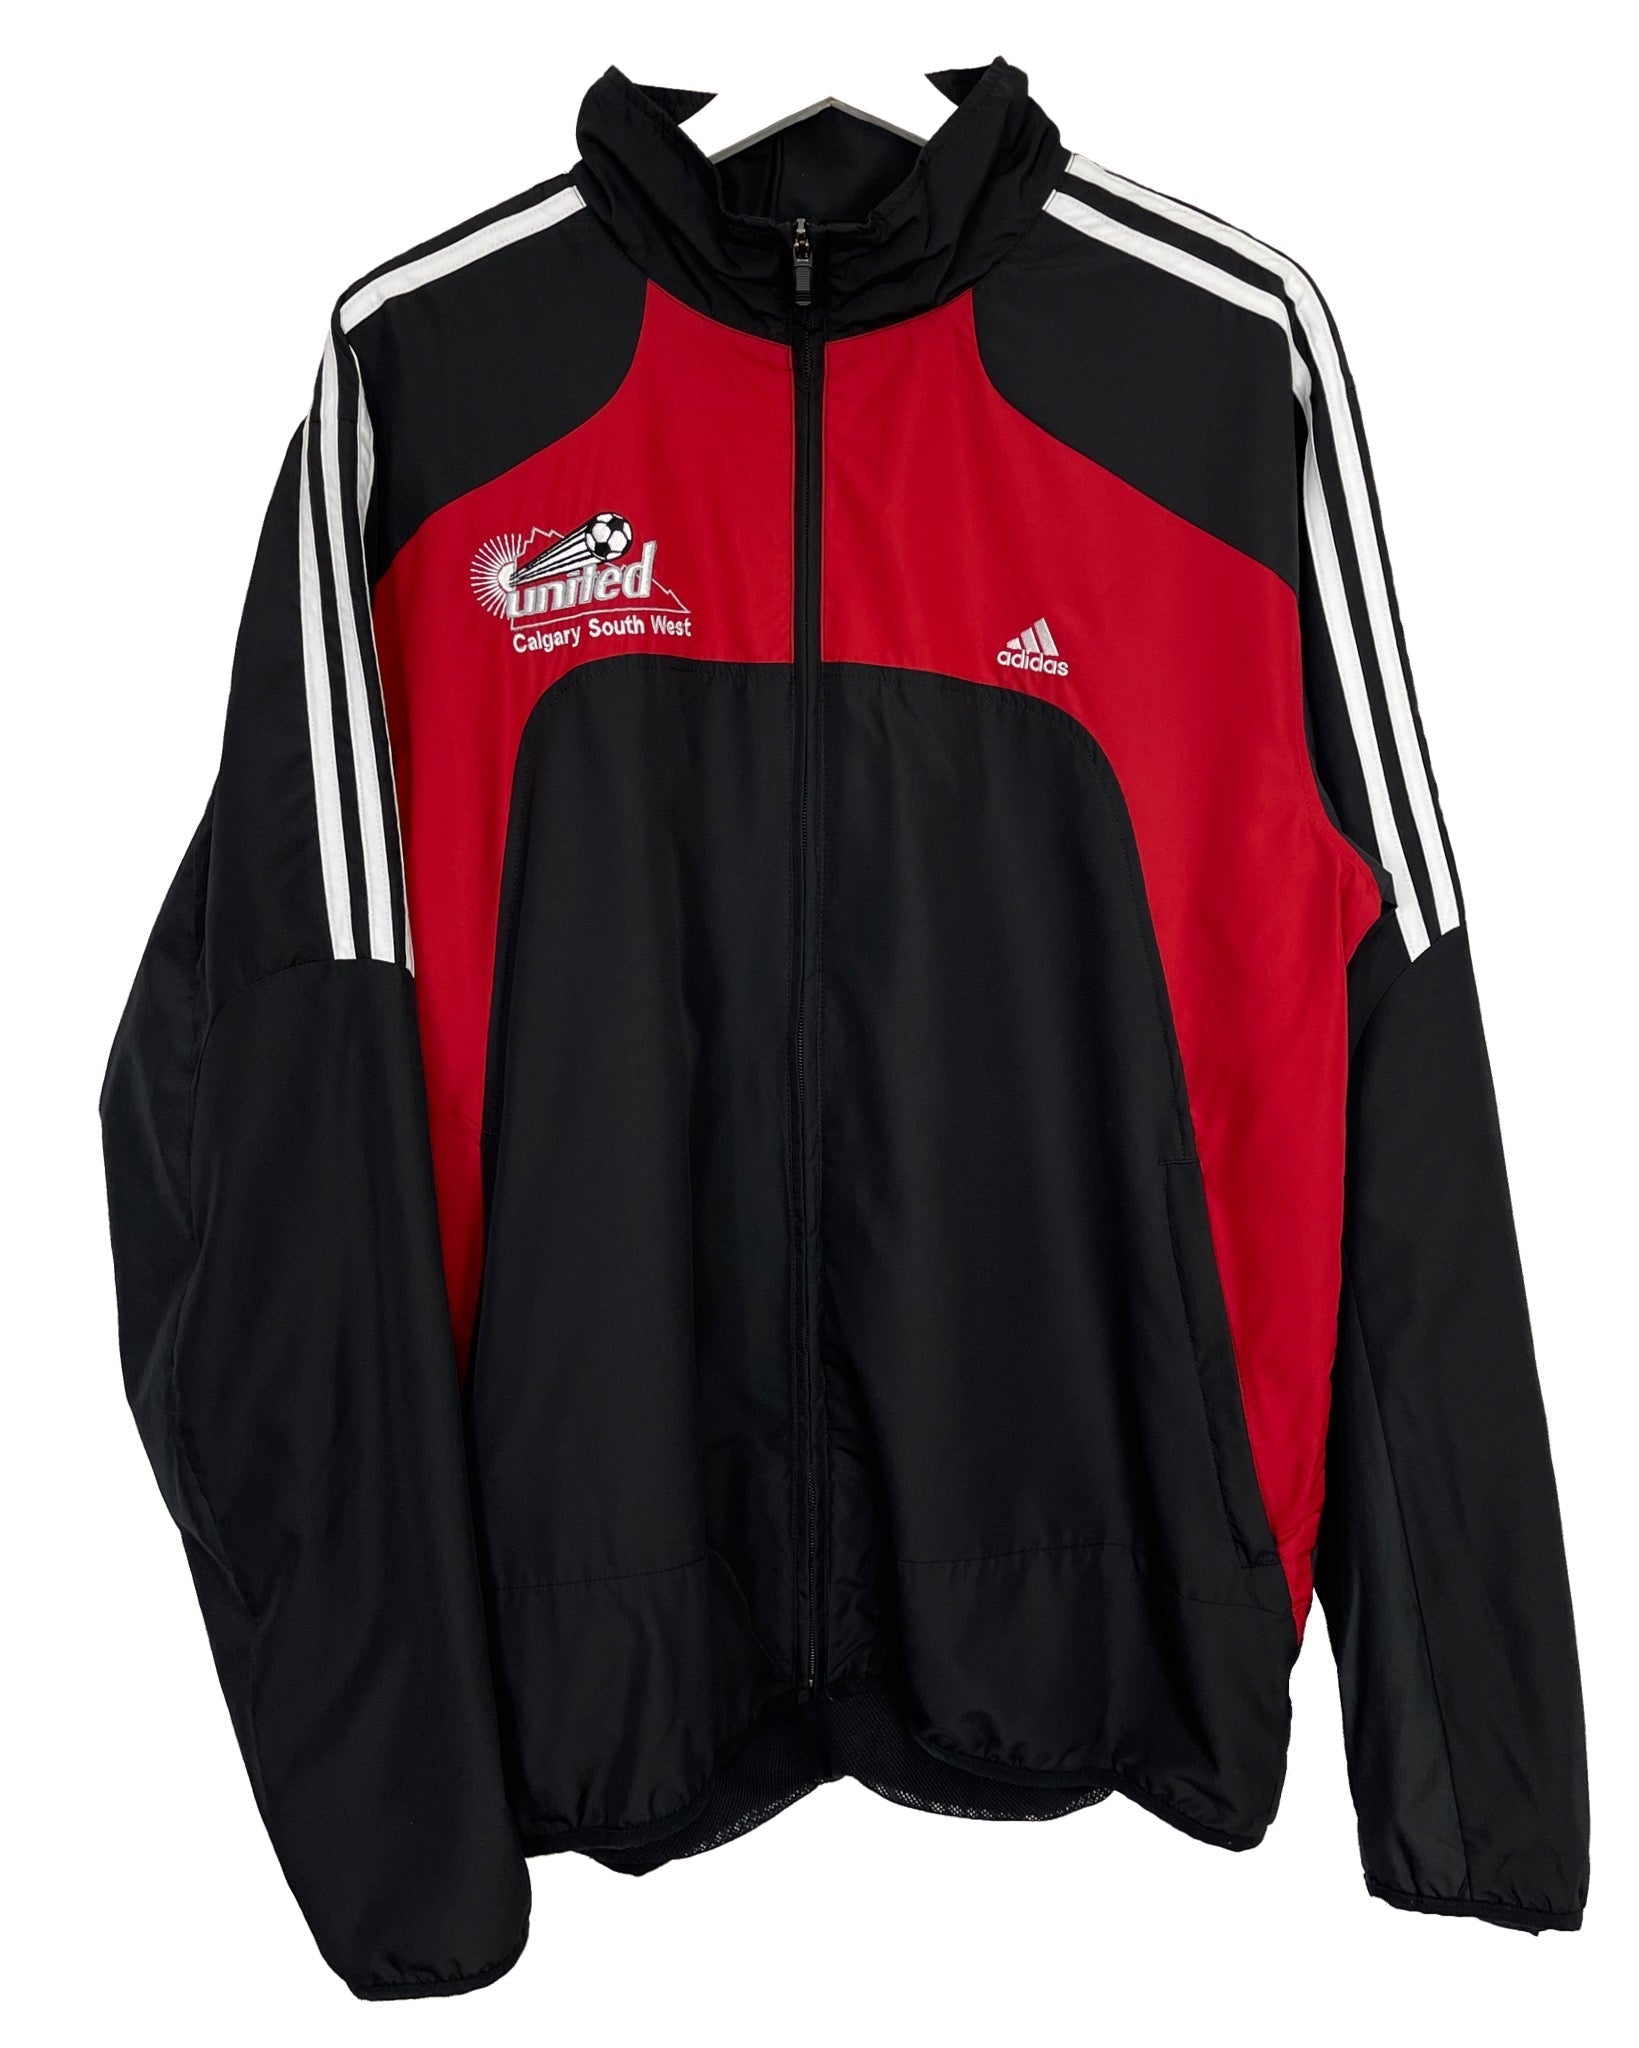  Coupe-vent Adidas Coupe-vent - Calgary South West United - L - PLOMOSTORE